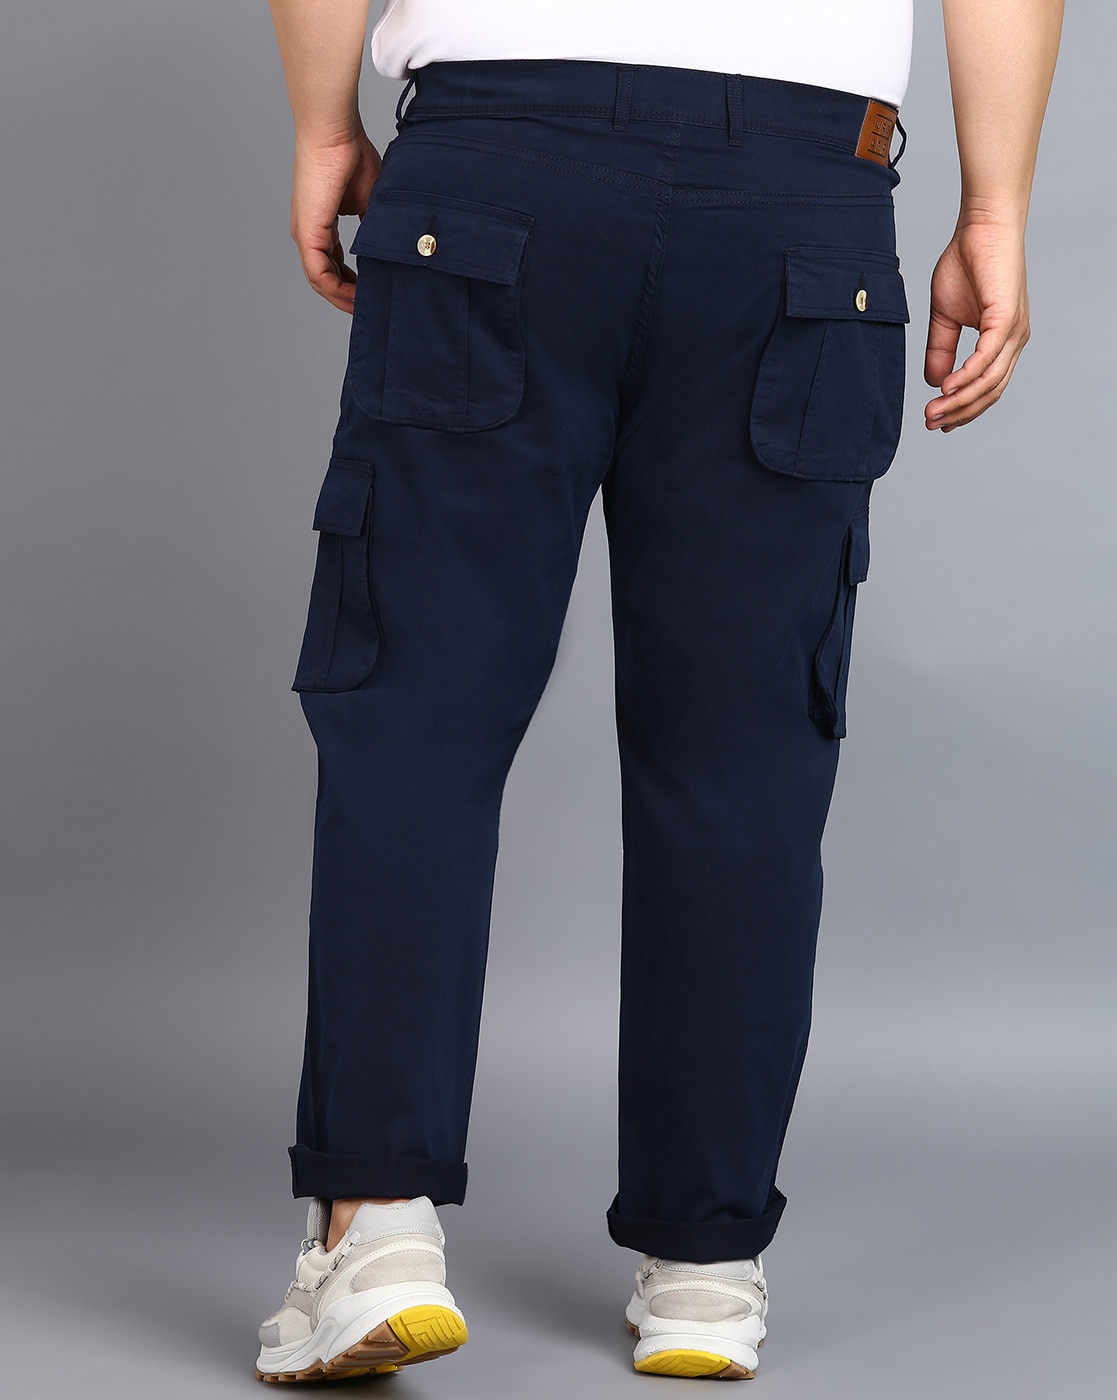 Buy NAVY BLUE CARGO PANTS Online at Best Prices in India - JioMart.